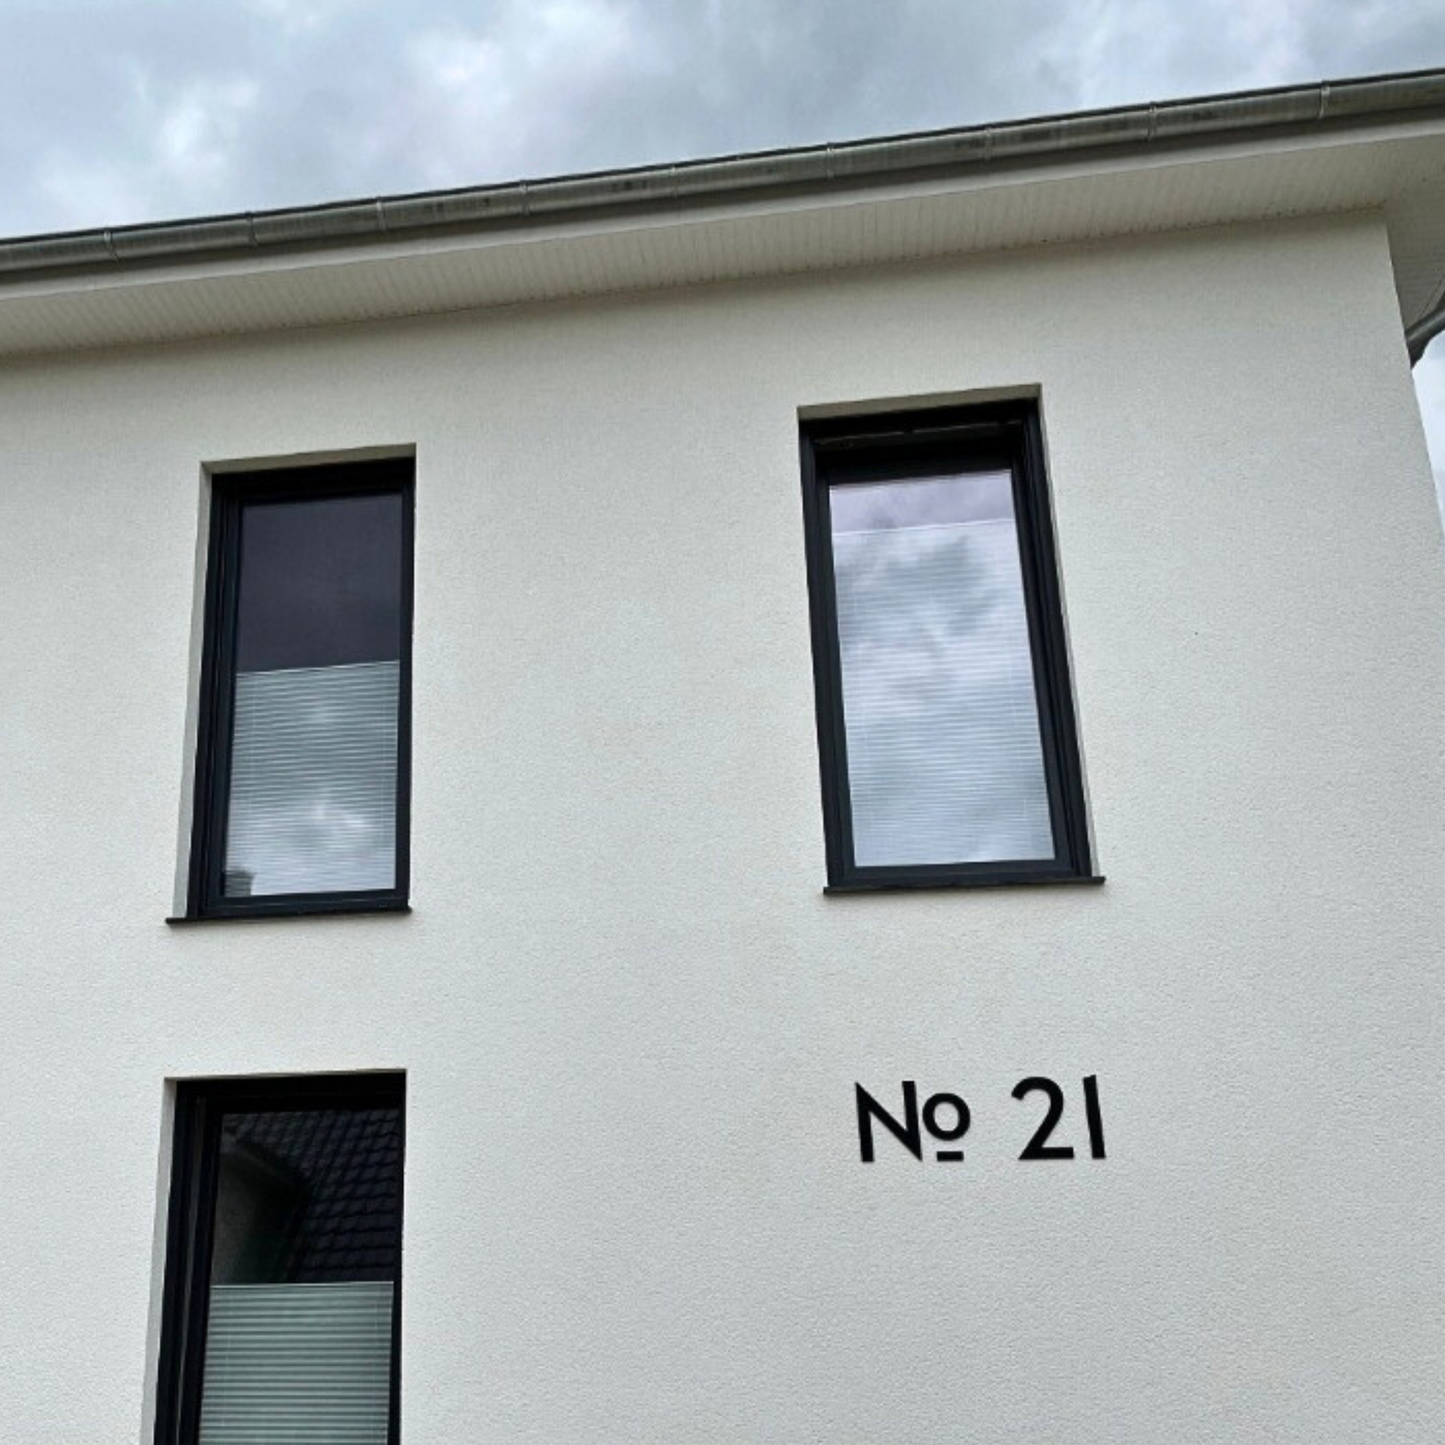 12 inch CLASSIC MODERN house numbers for address signs